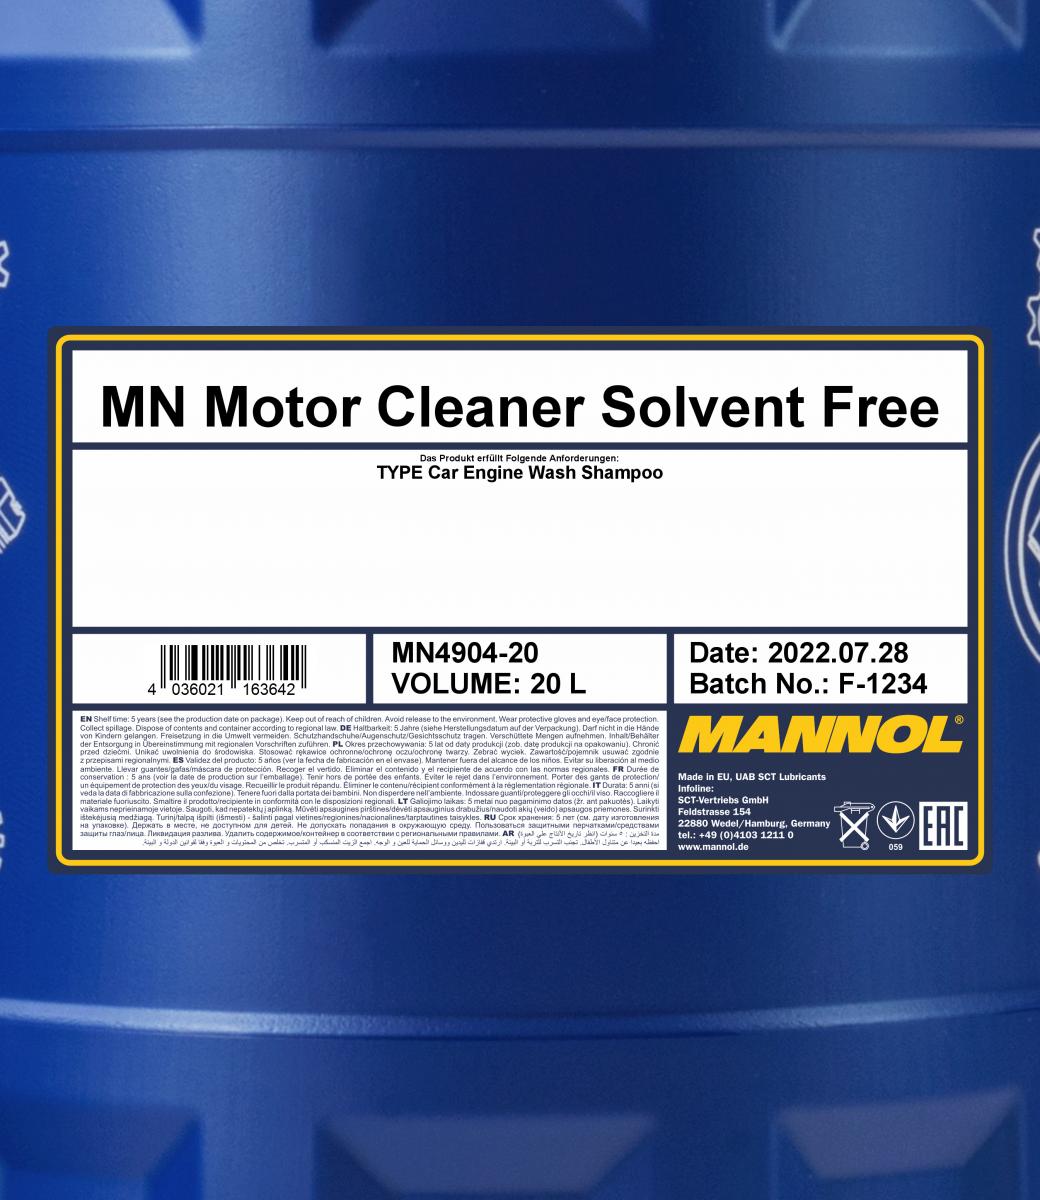 MN Motor Cleaner Solvent Free